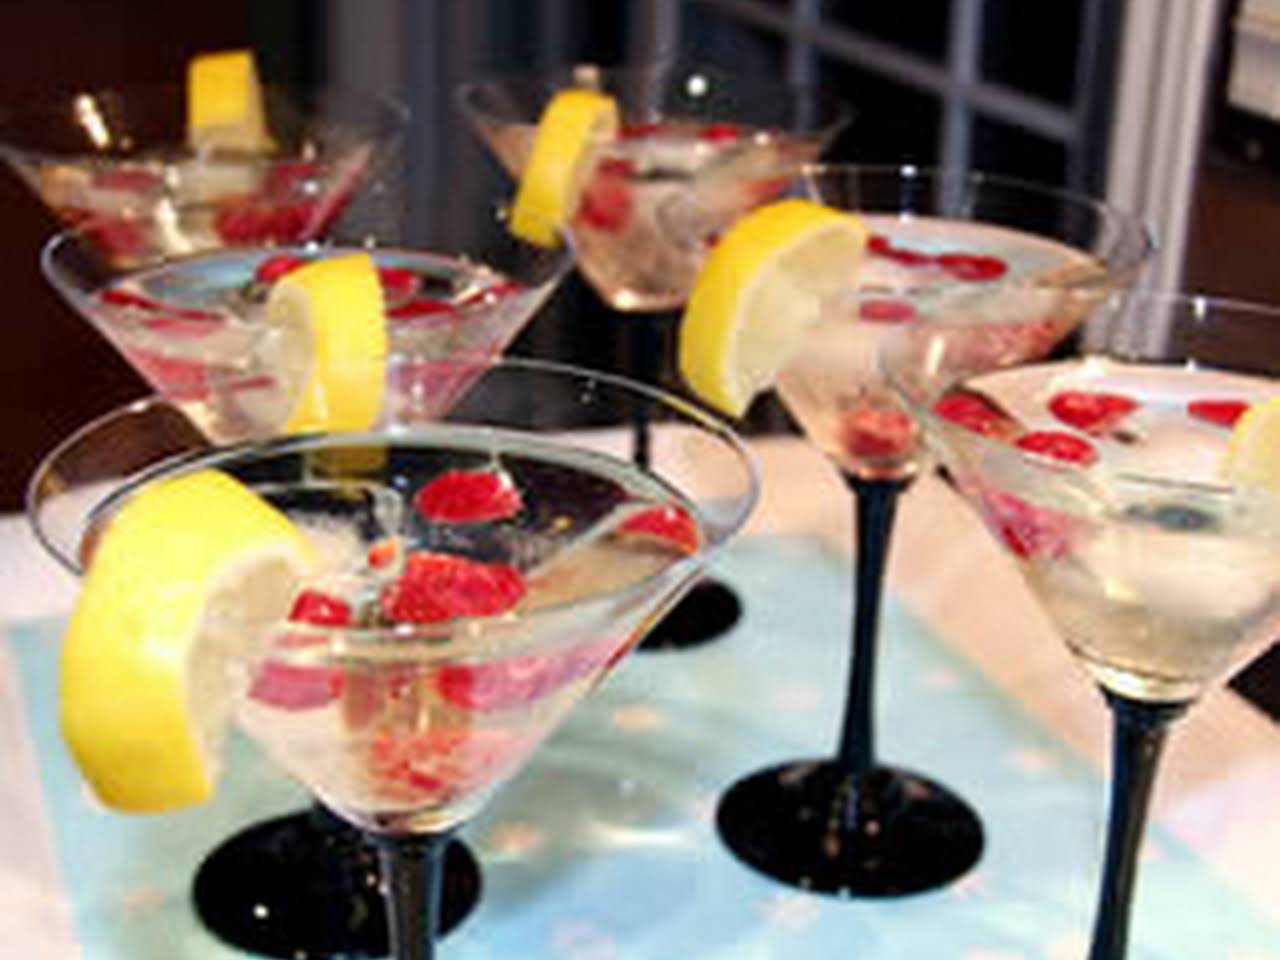 10 Best Raspberry Champagne Vodka Recipes Yummly,Cars With Small Grills